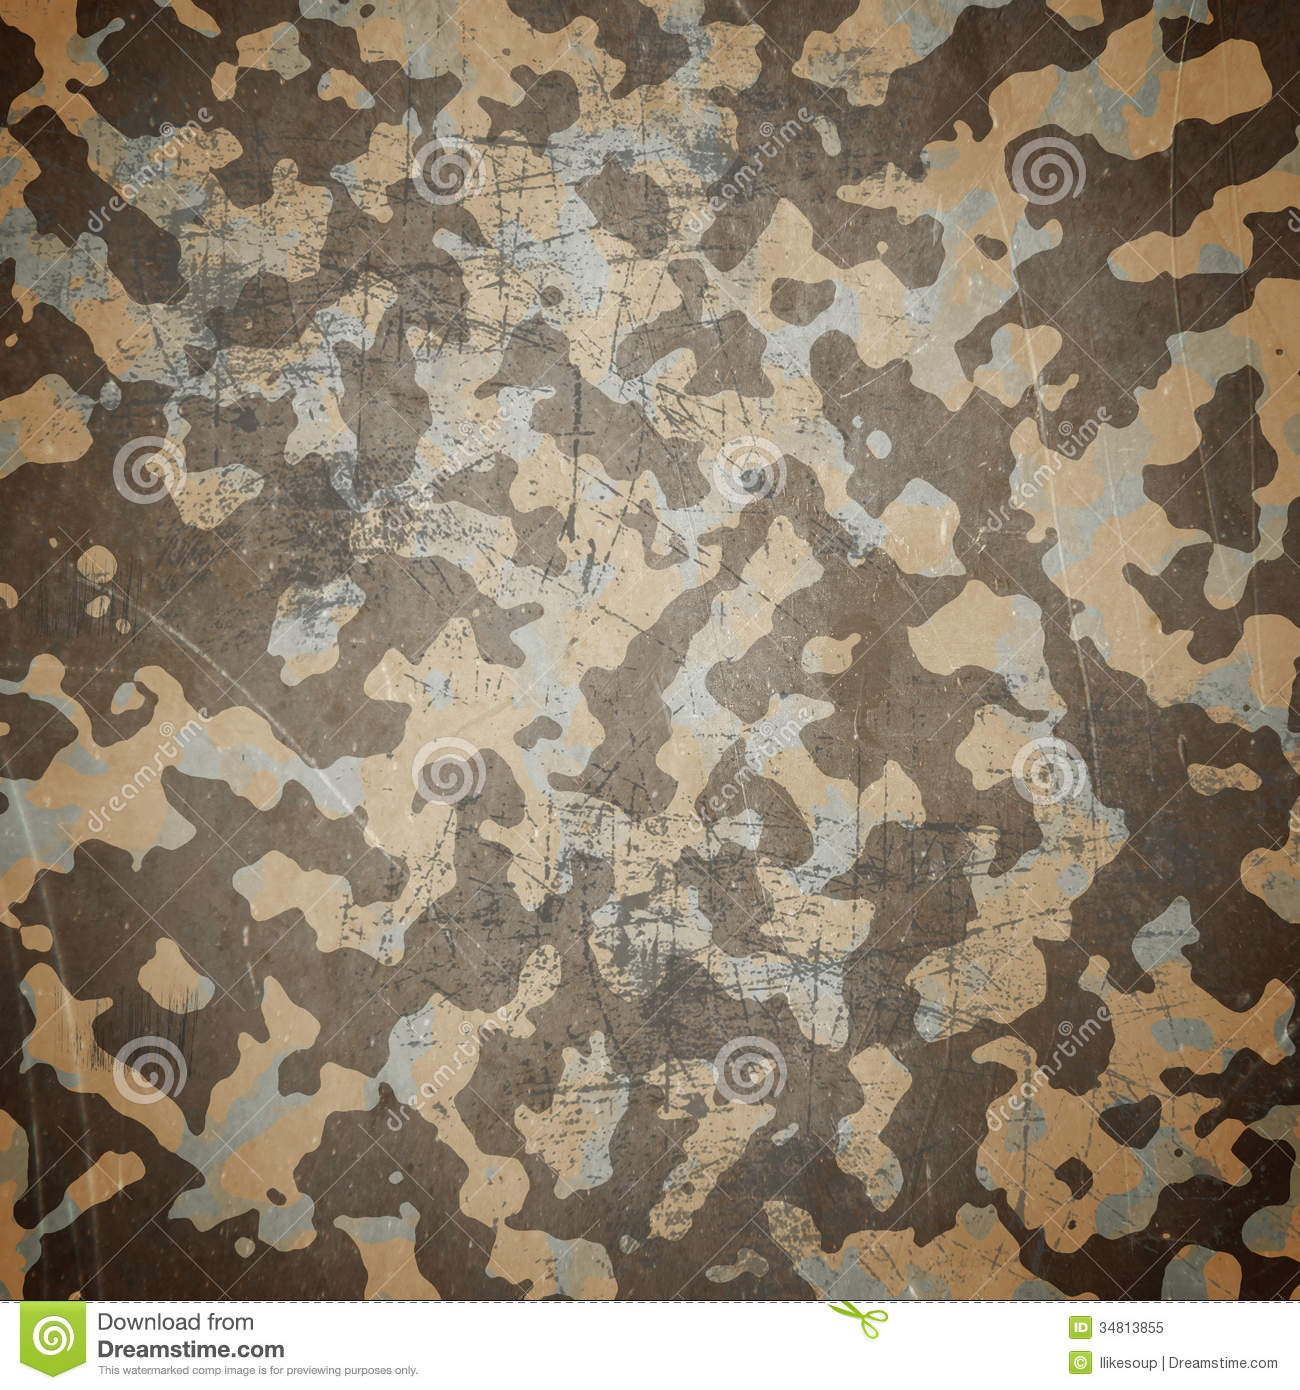 Free download Army Camouflage Background Clipart Clipart.